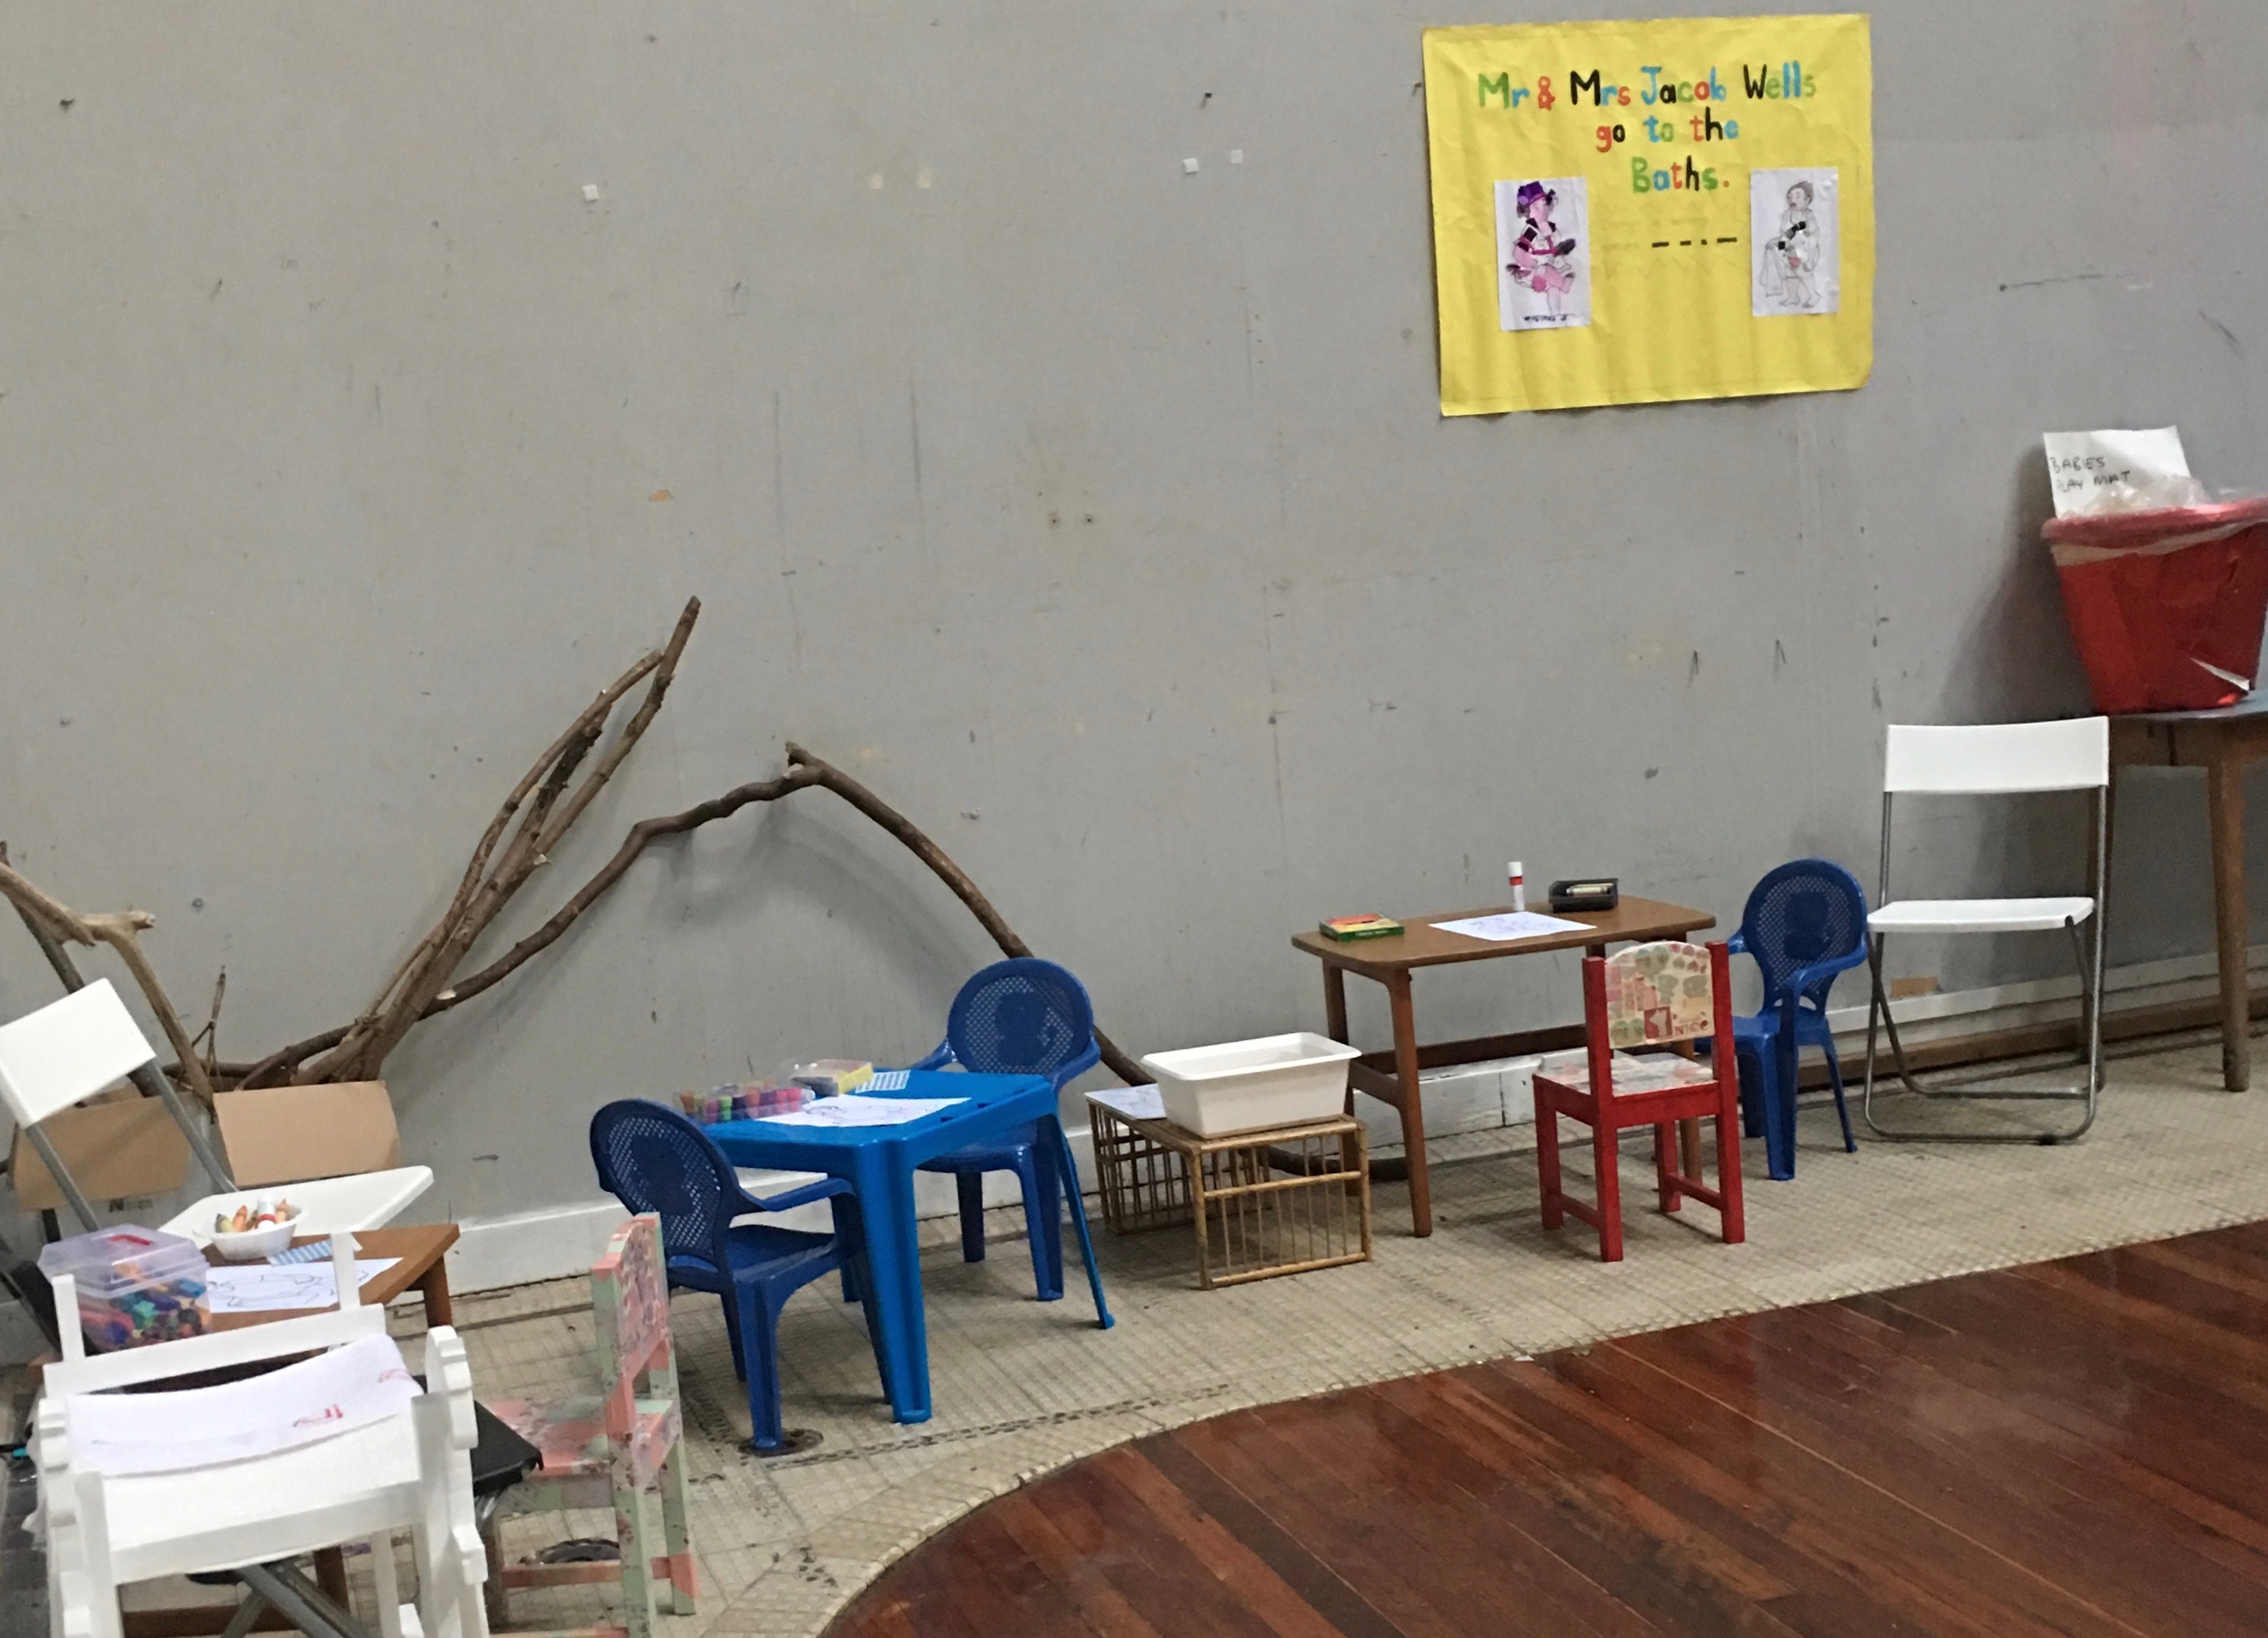 Childrens tables and chairs, set-up for drawing